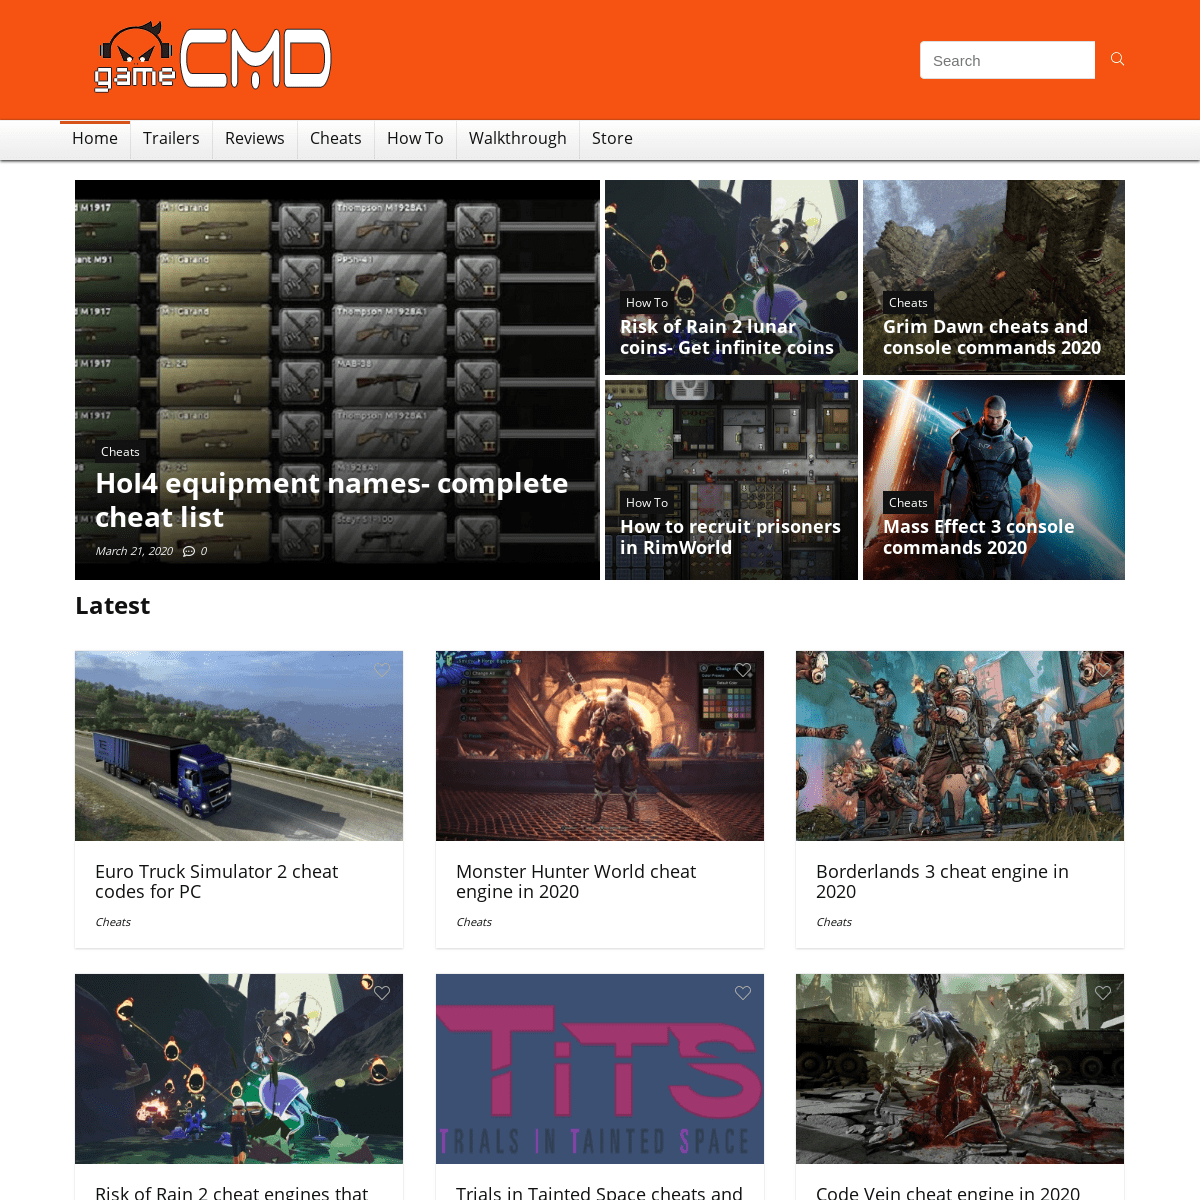 A complete backup of gamecmd.com